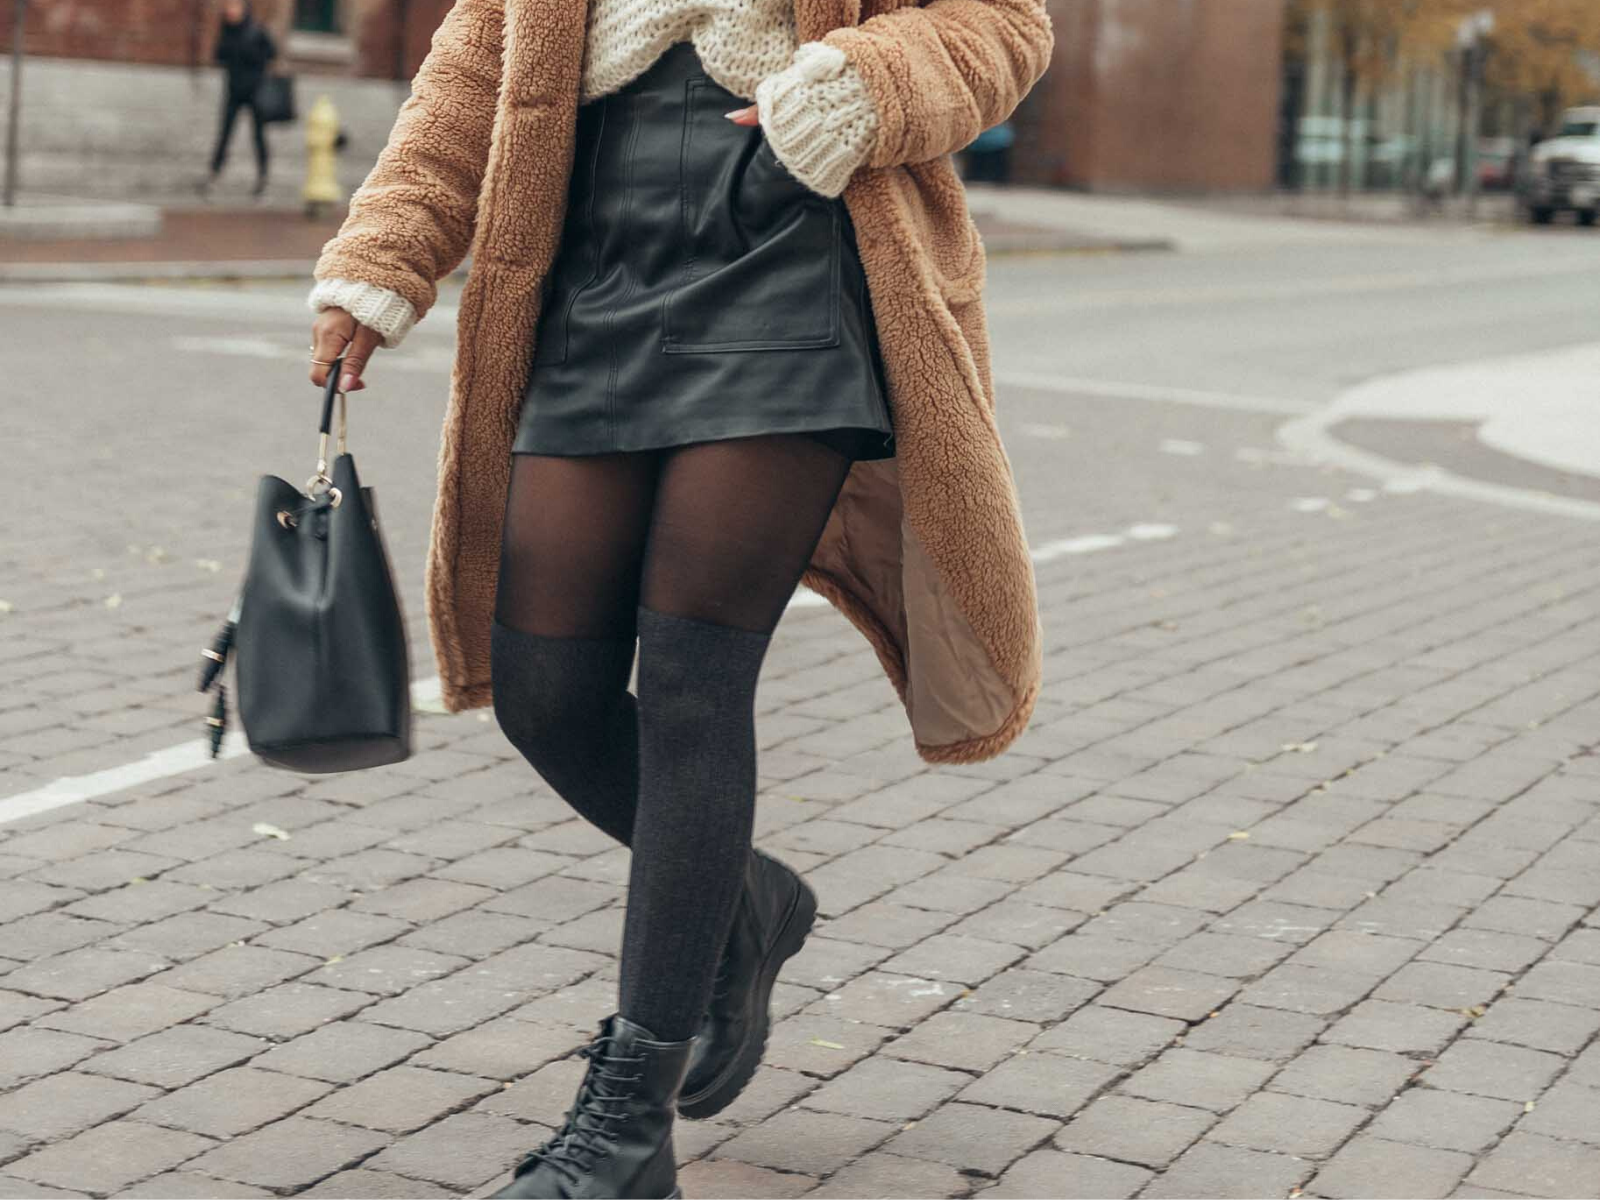 5 Style Tips to Dress Warm and Stylish this Winter – From Rachel